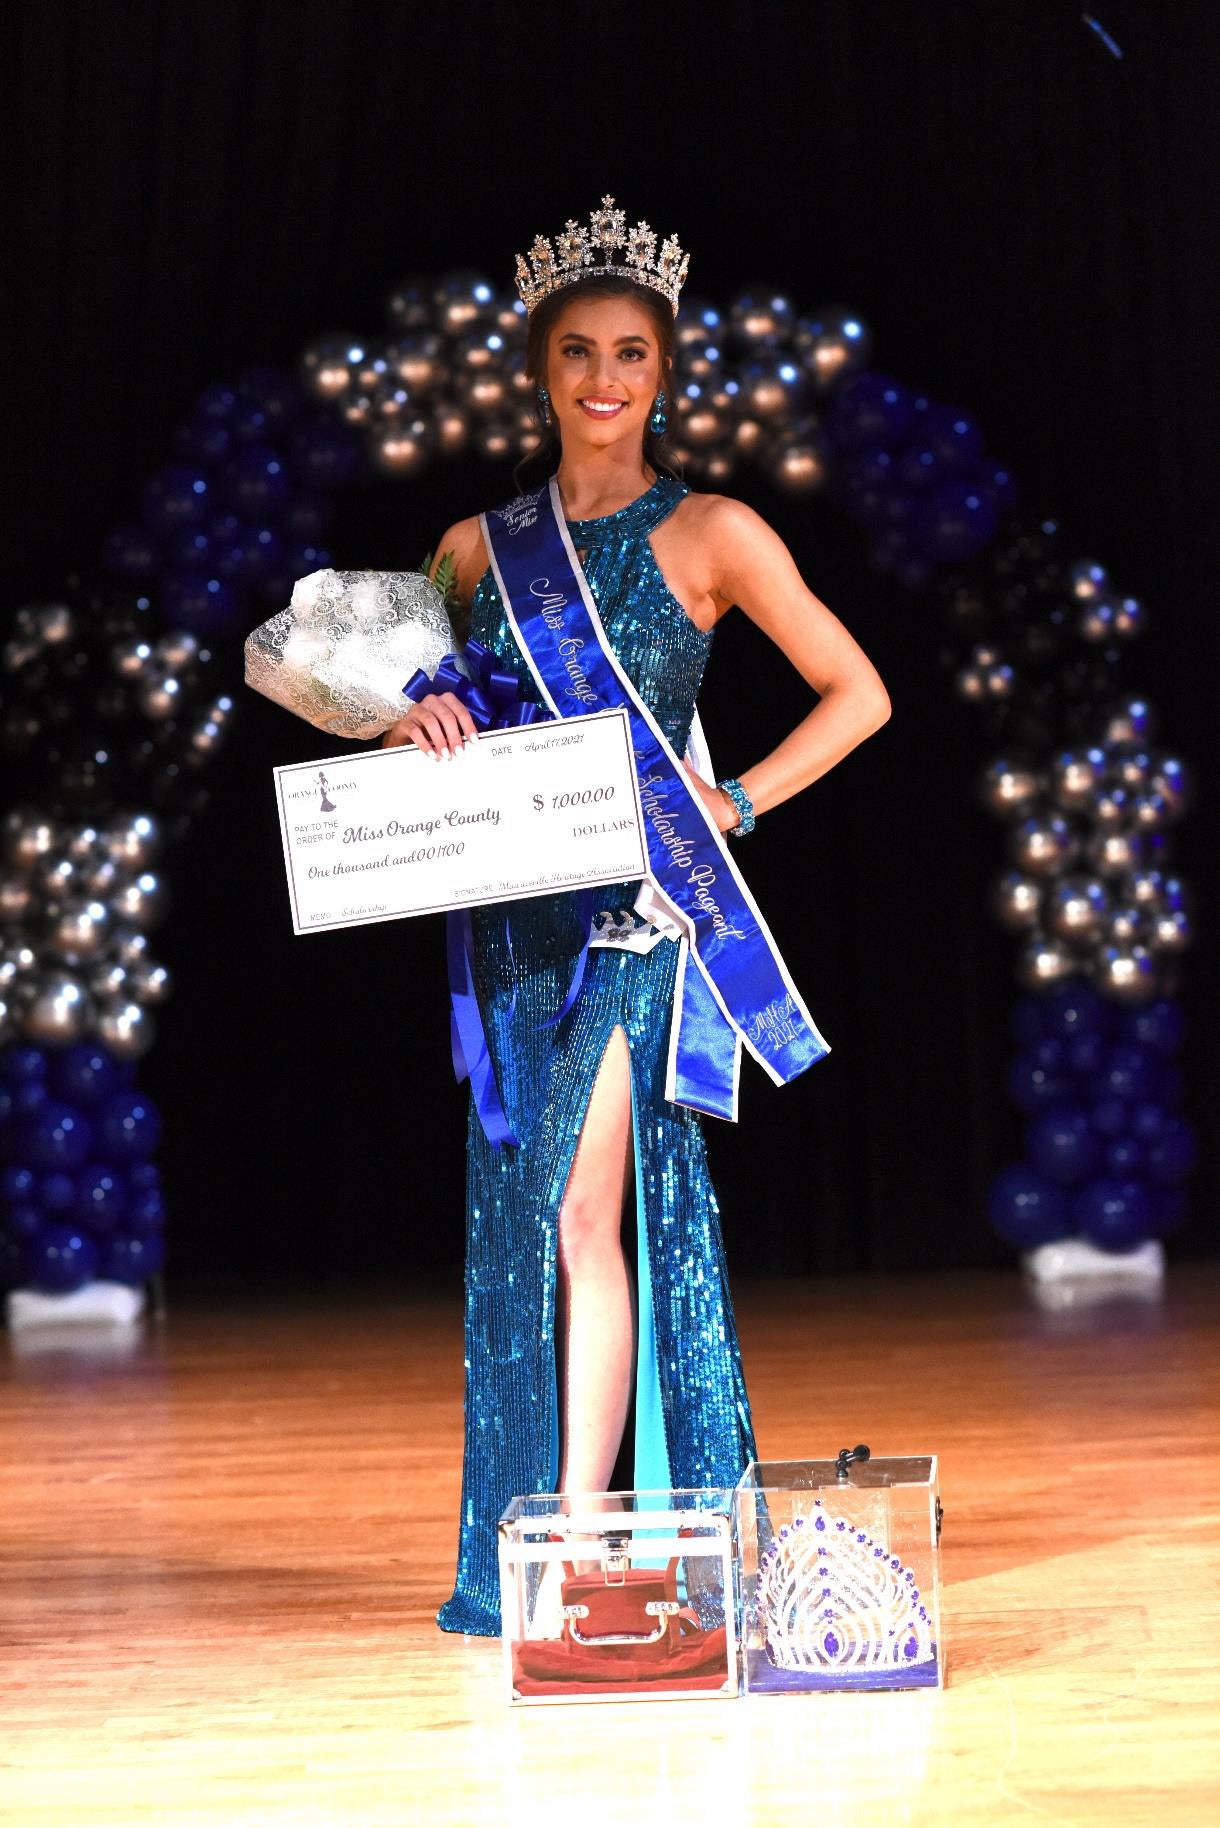 2021 “Miss Orange County Scholarship Pageant” winners announced